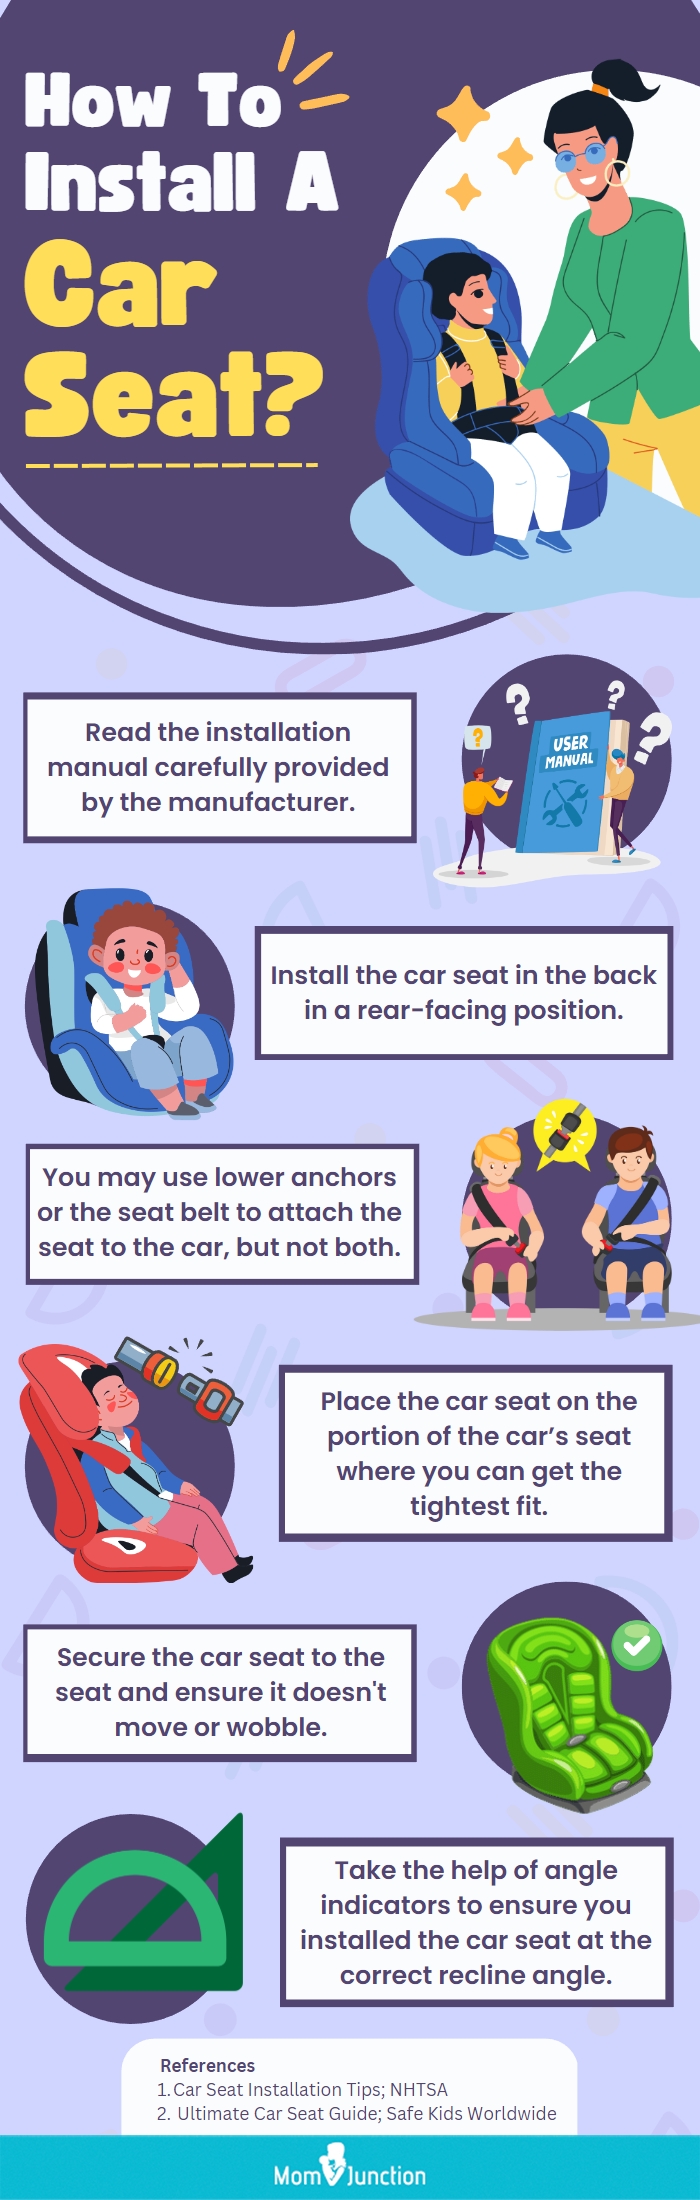 How To Install A Car Seat (infographic)